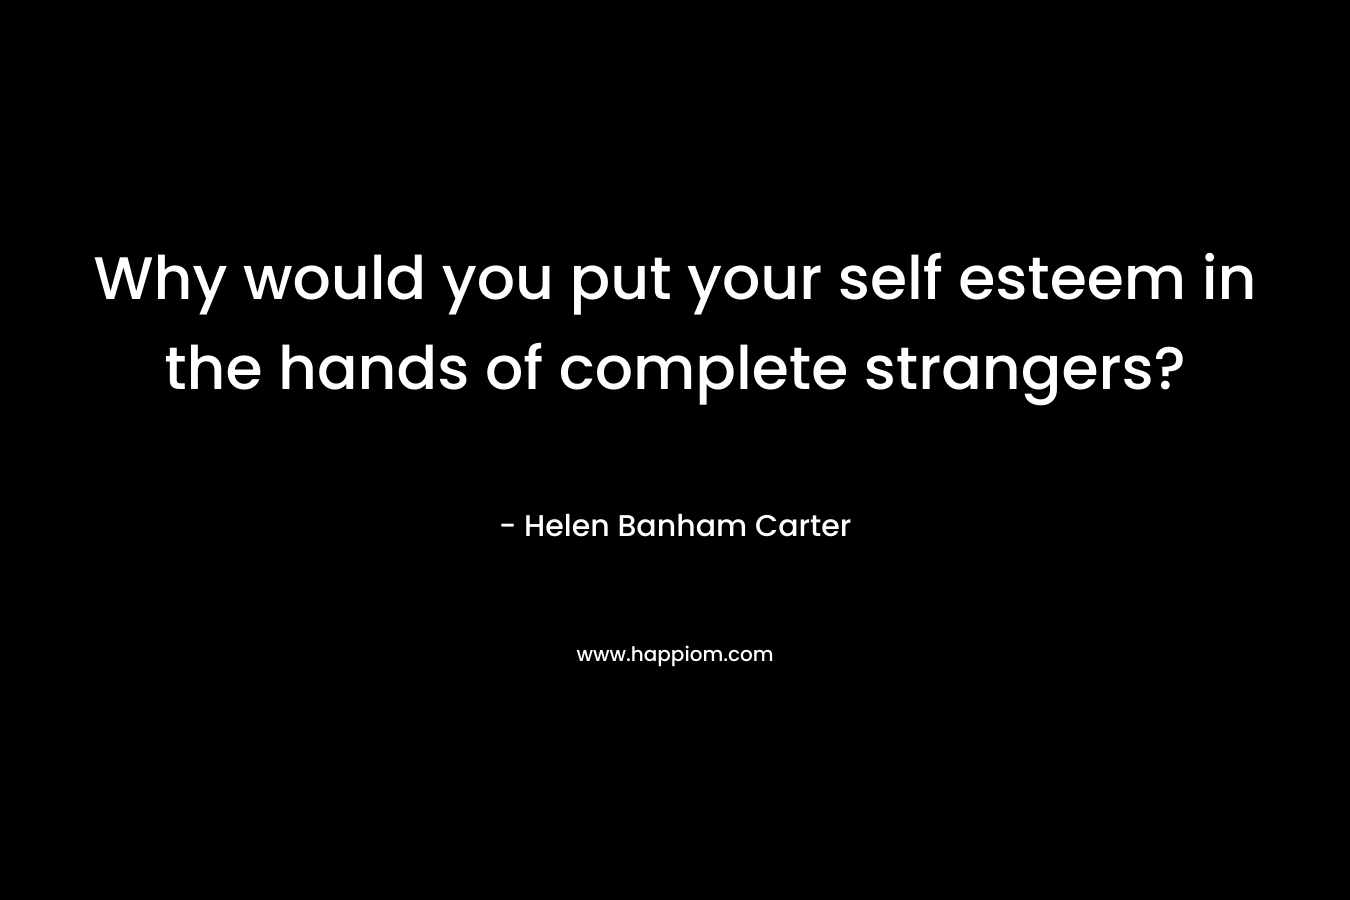 Why would you put your self esteem in the hands of complete strangers?